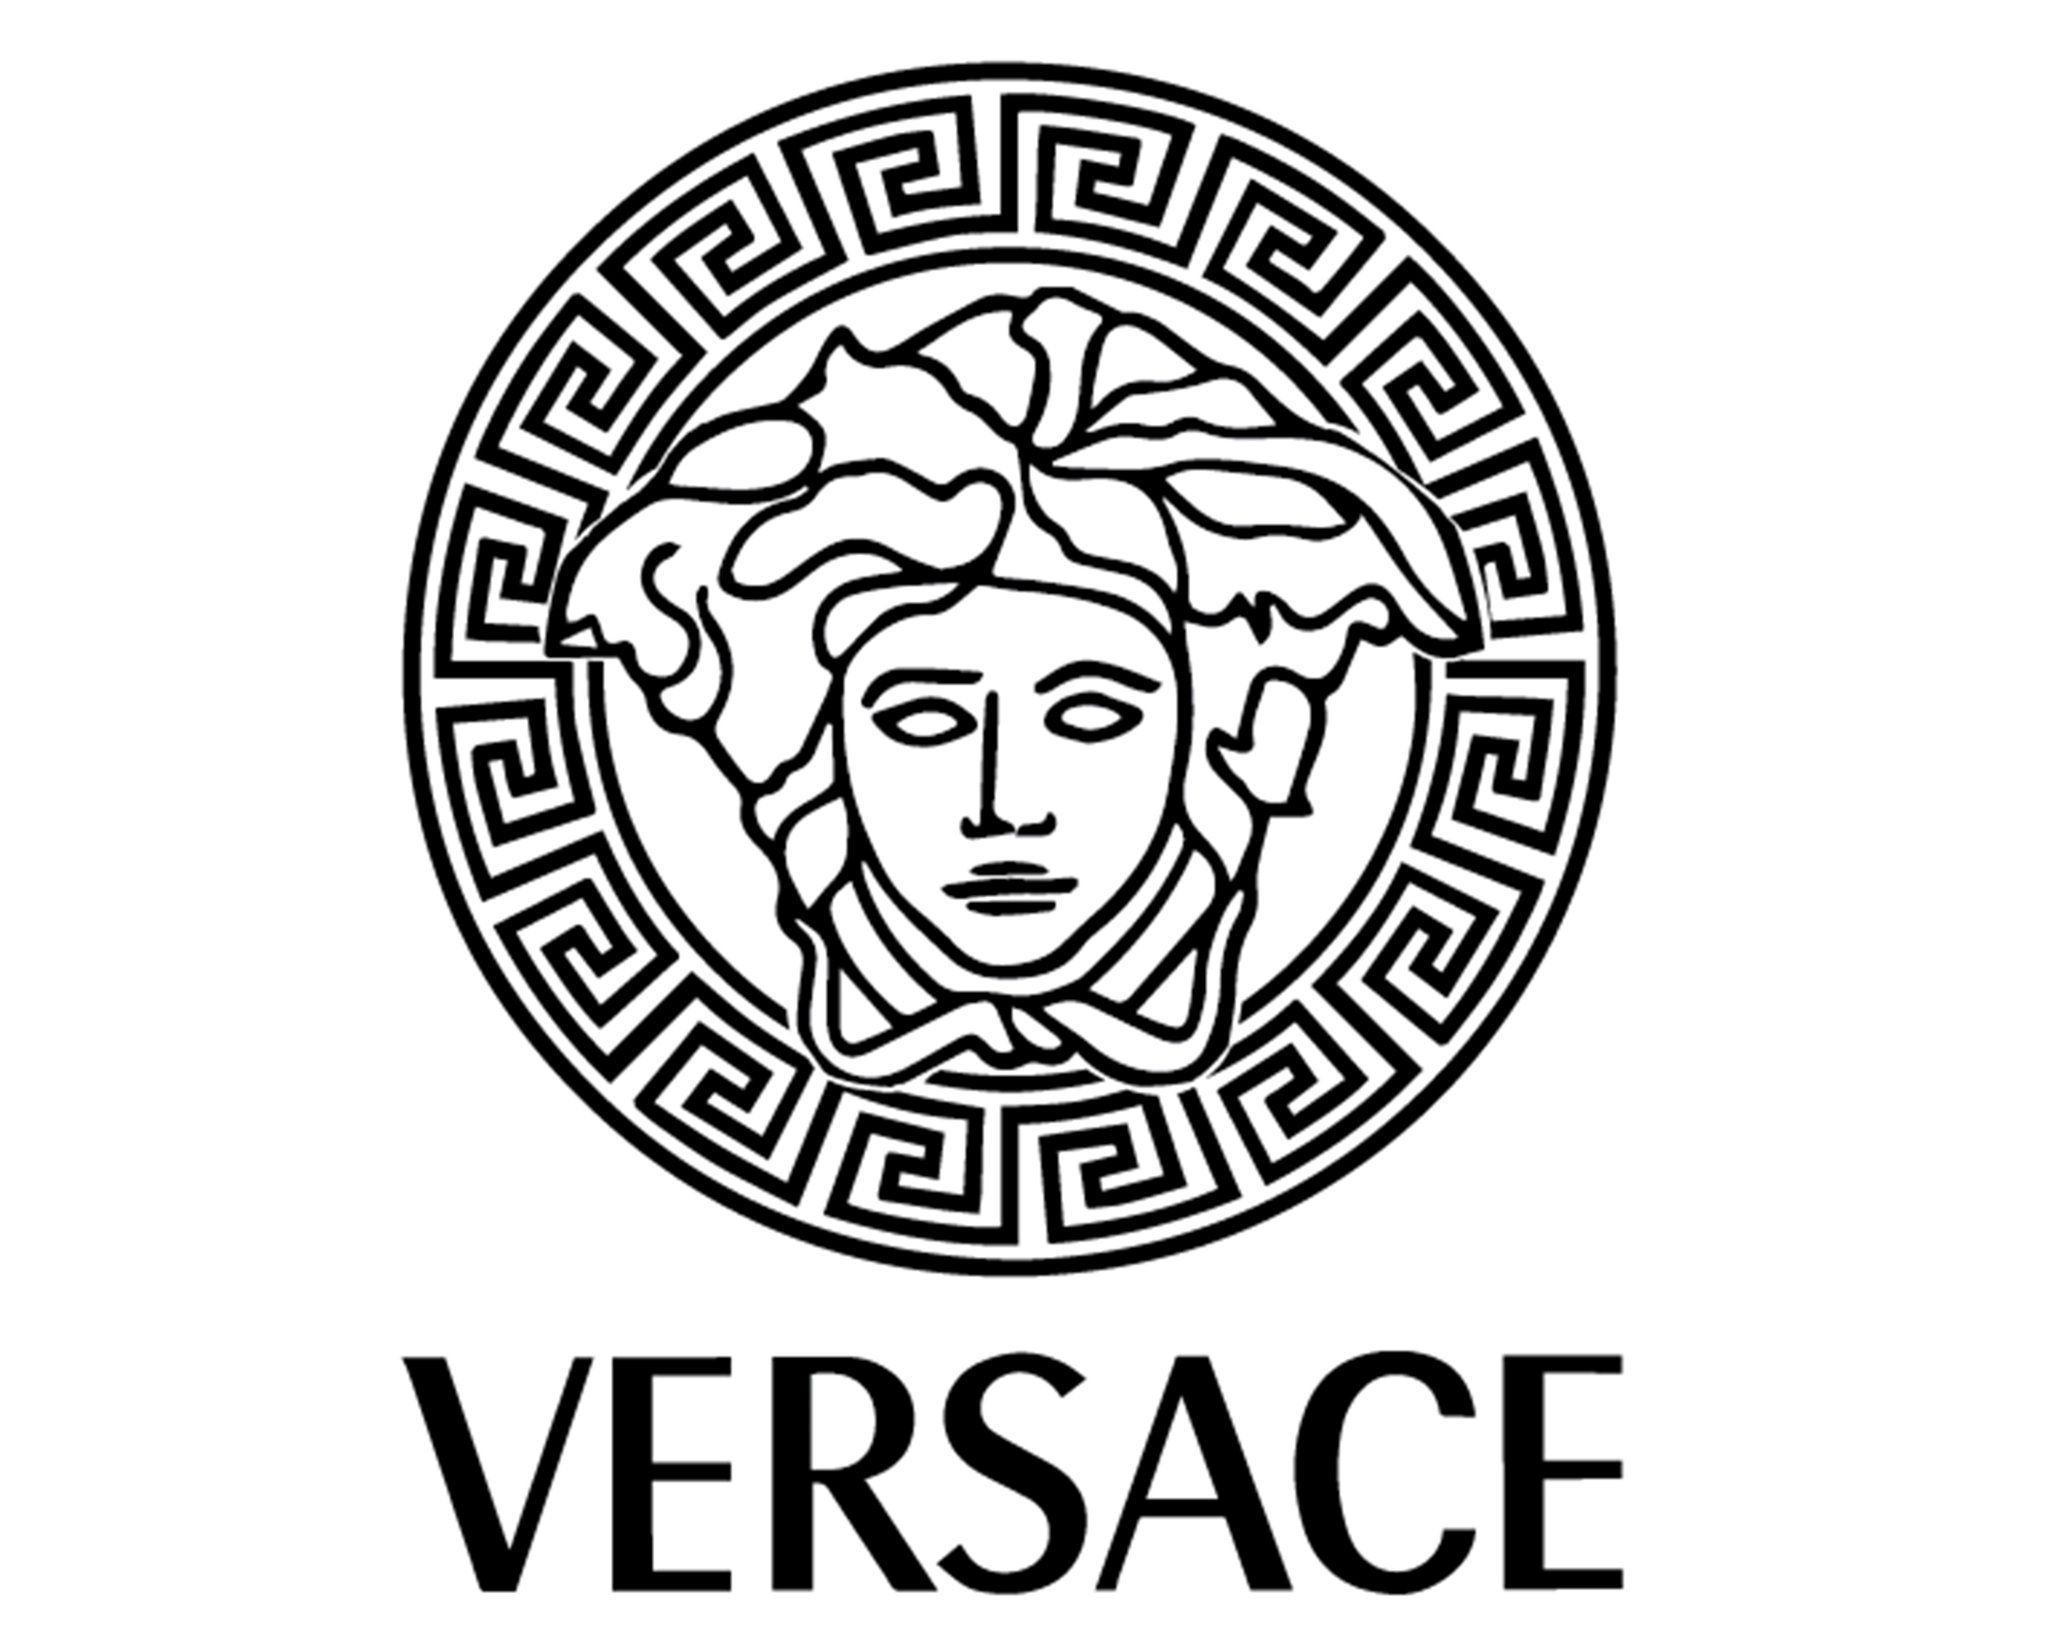 62 Versace icon images at Vectorified.com